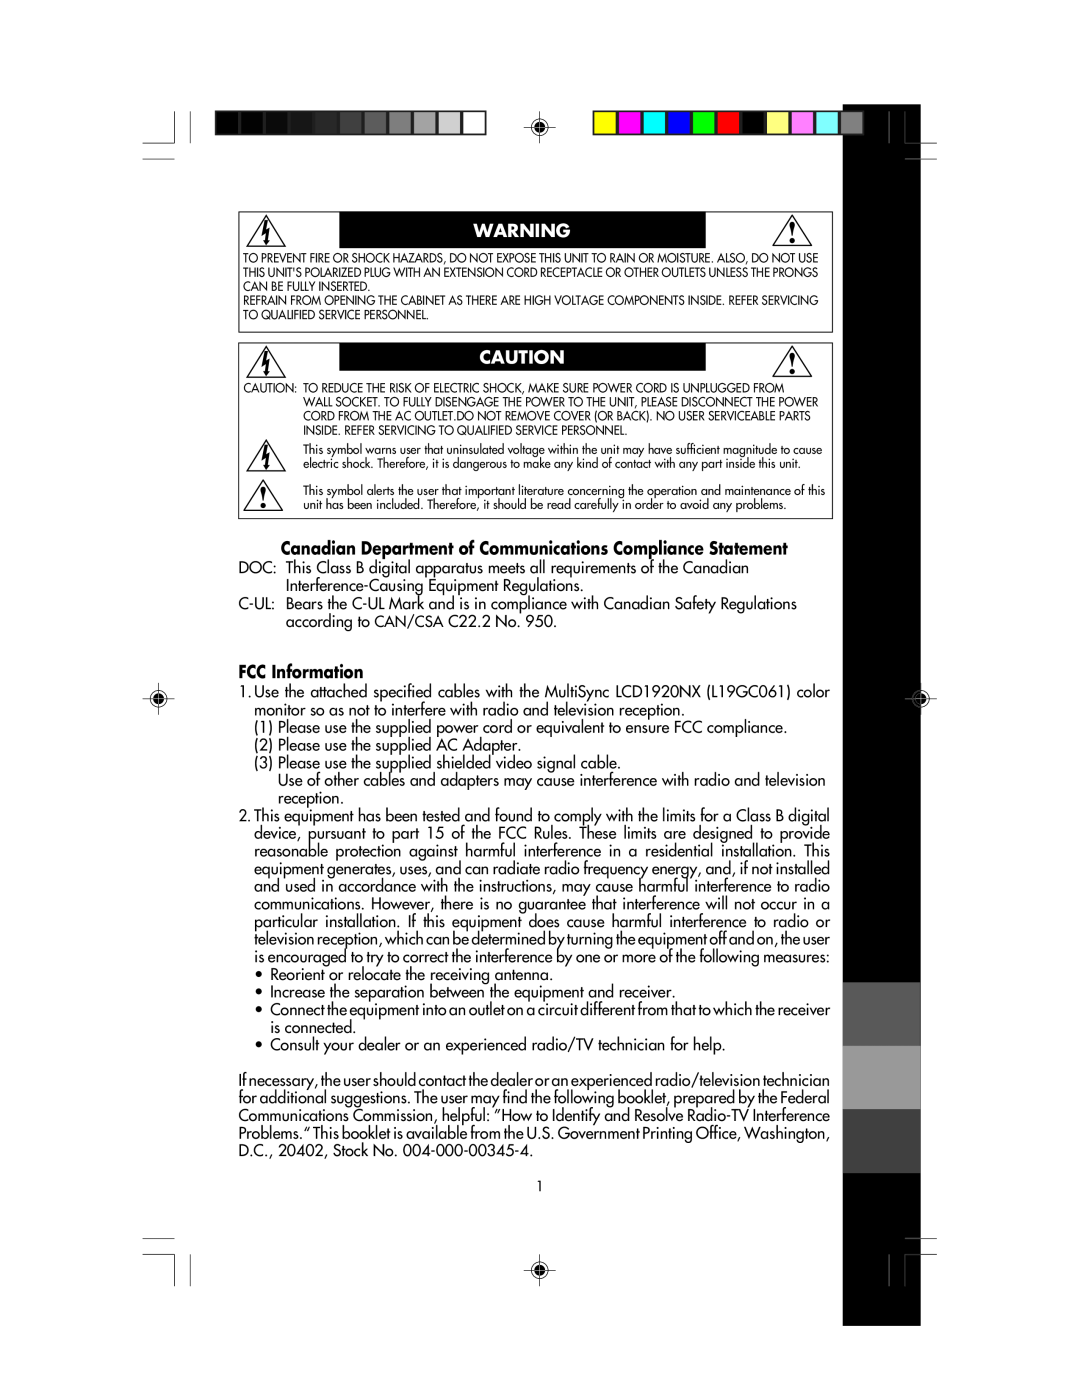 NEC LCD1920NX manual Canadian Department of Communications Compliance Statement, FCC Information 